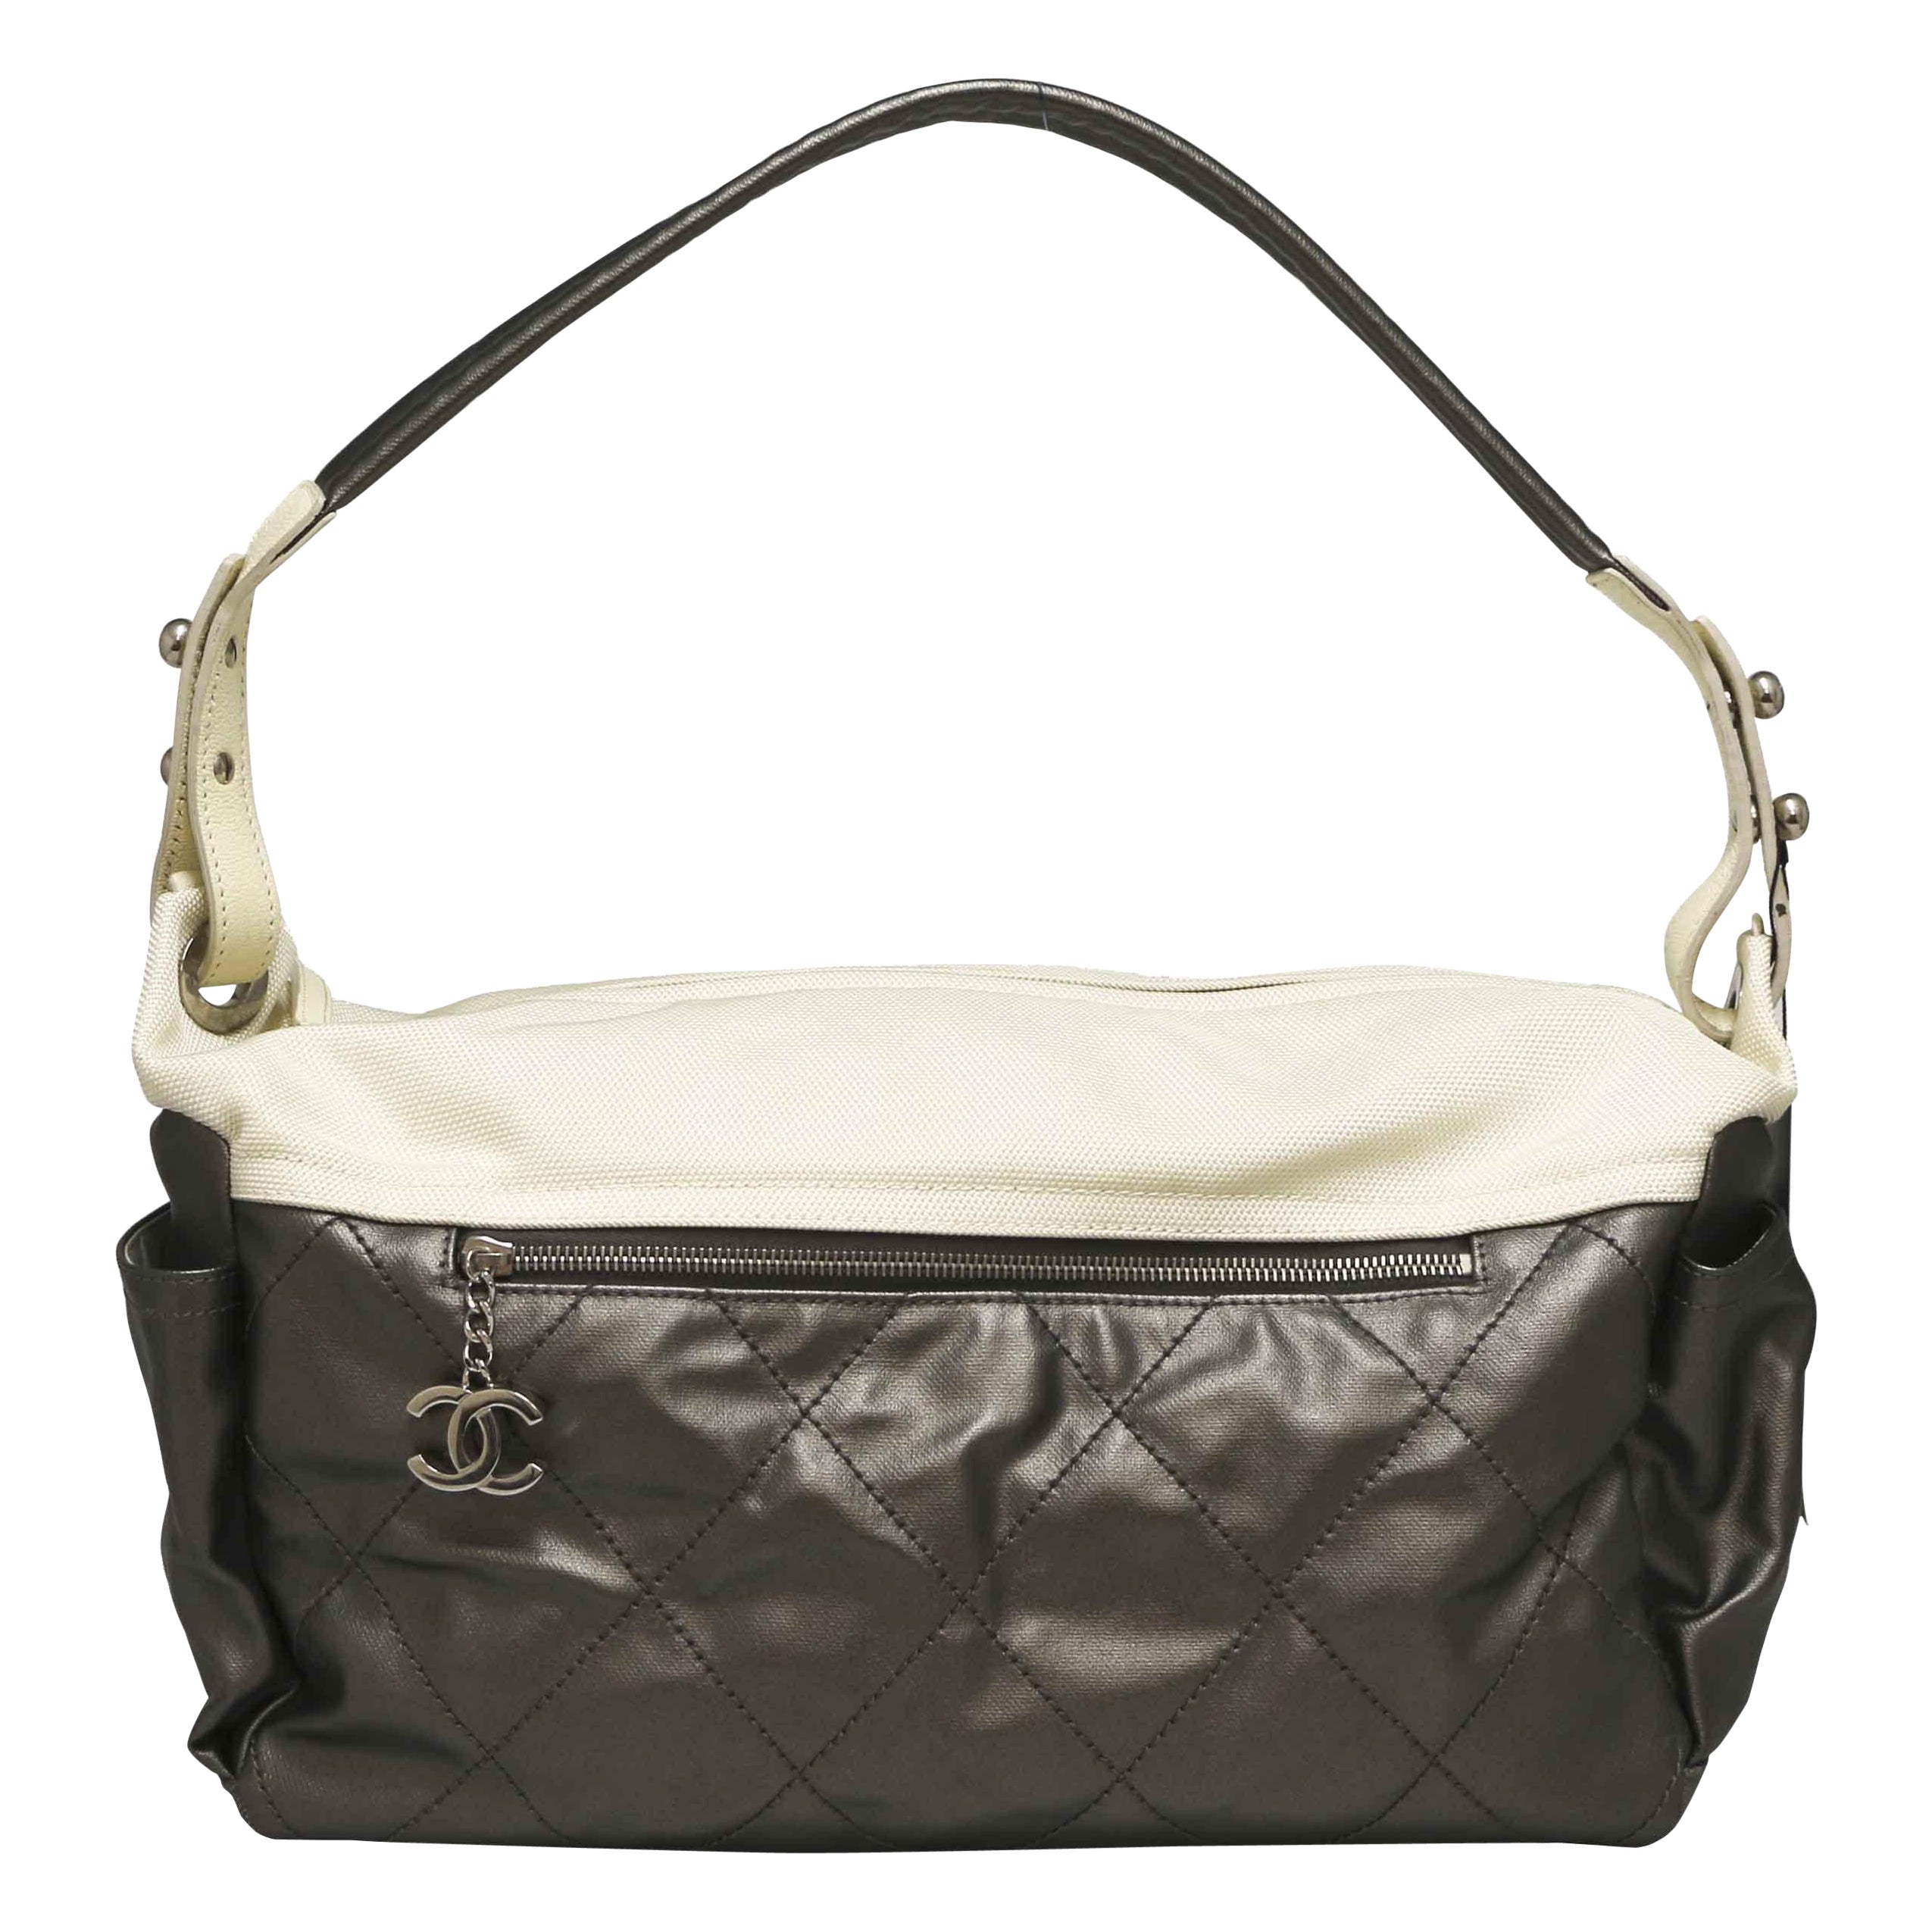 CHANEL Purple Clear Jelly Rubber Logo Tote Bag